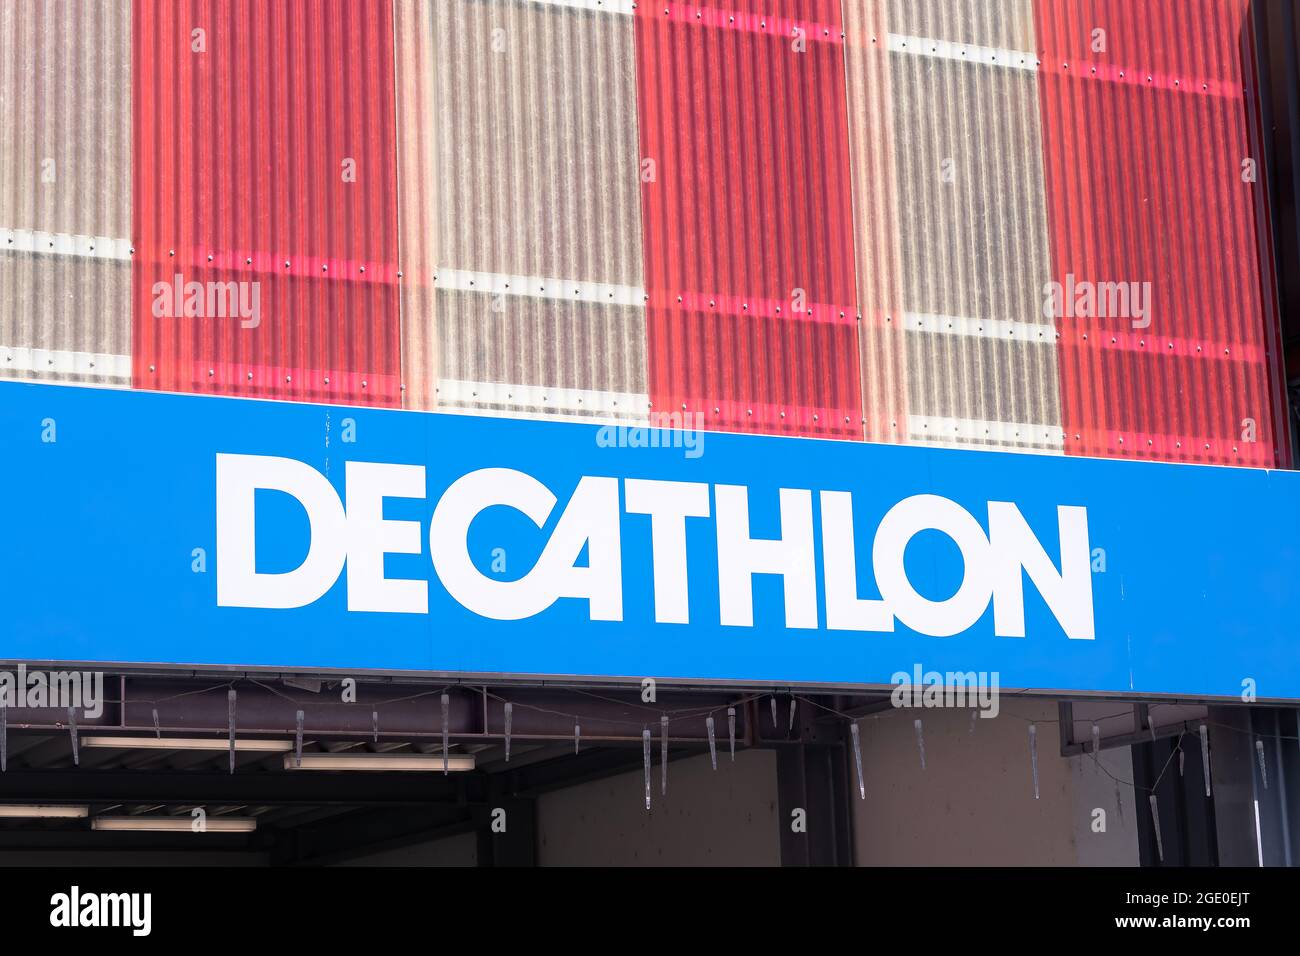 DIETLIKON, SWITZERLAND - APRIL 17, 2020: A Decathlon store for sportswear and recreation accessories in Dietlikon Stock Photo